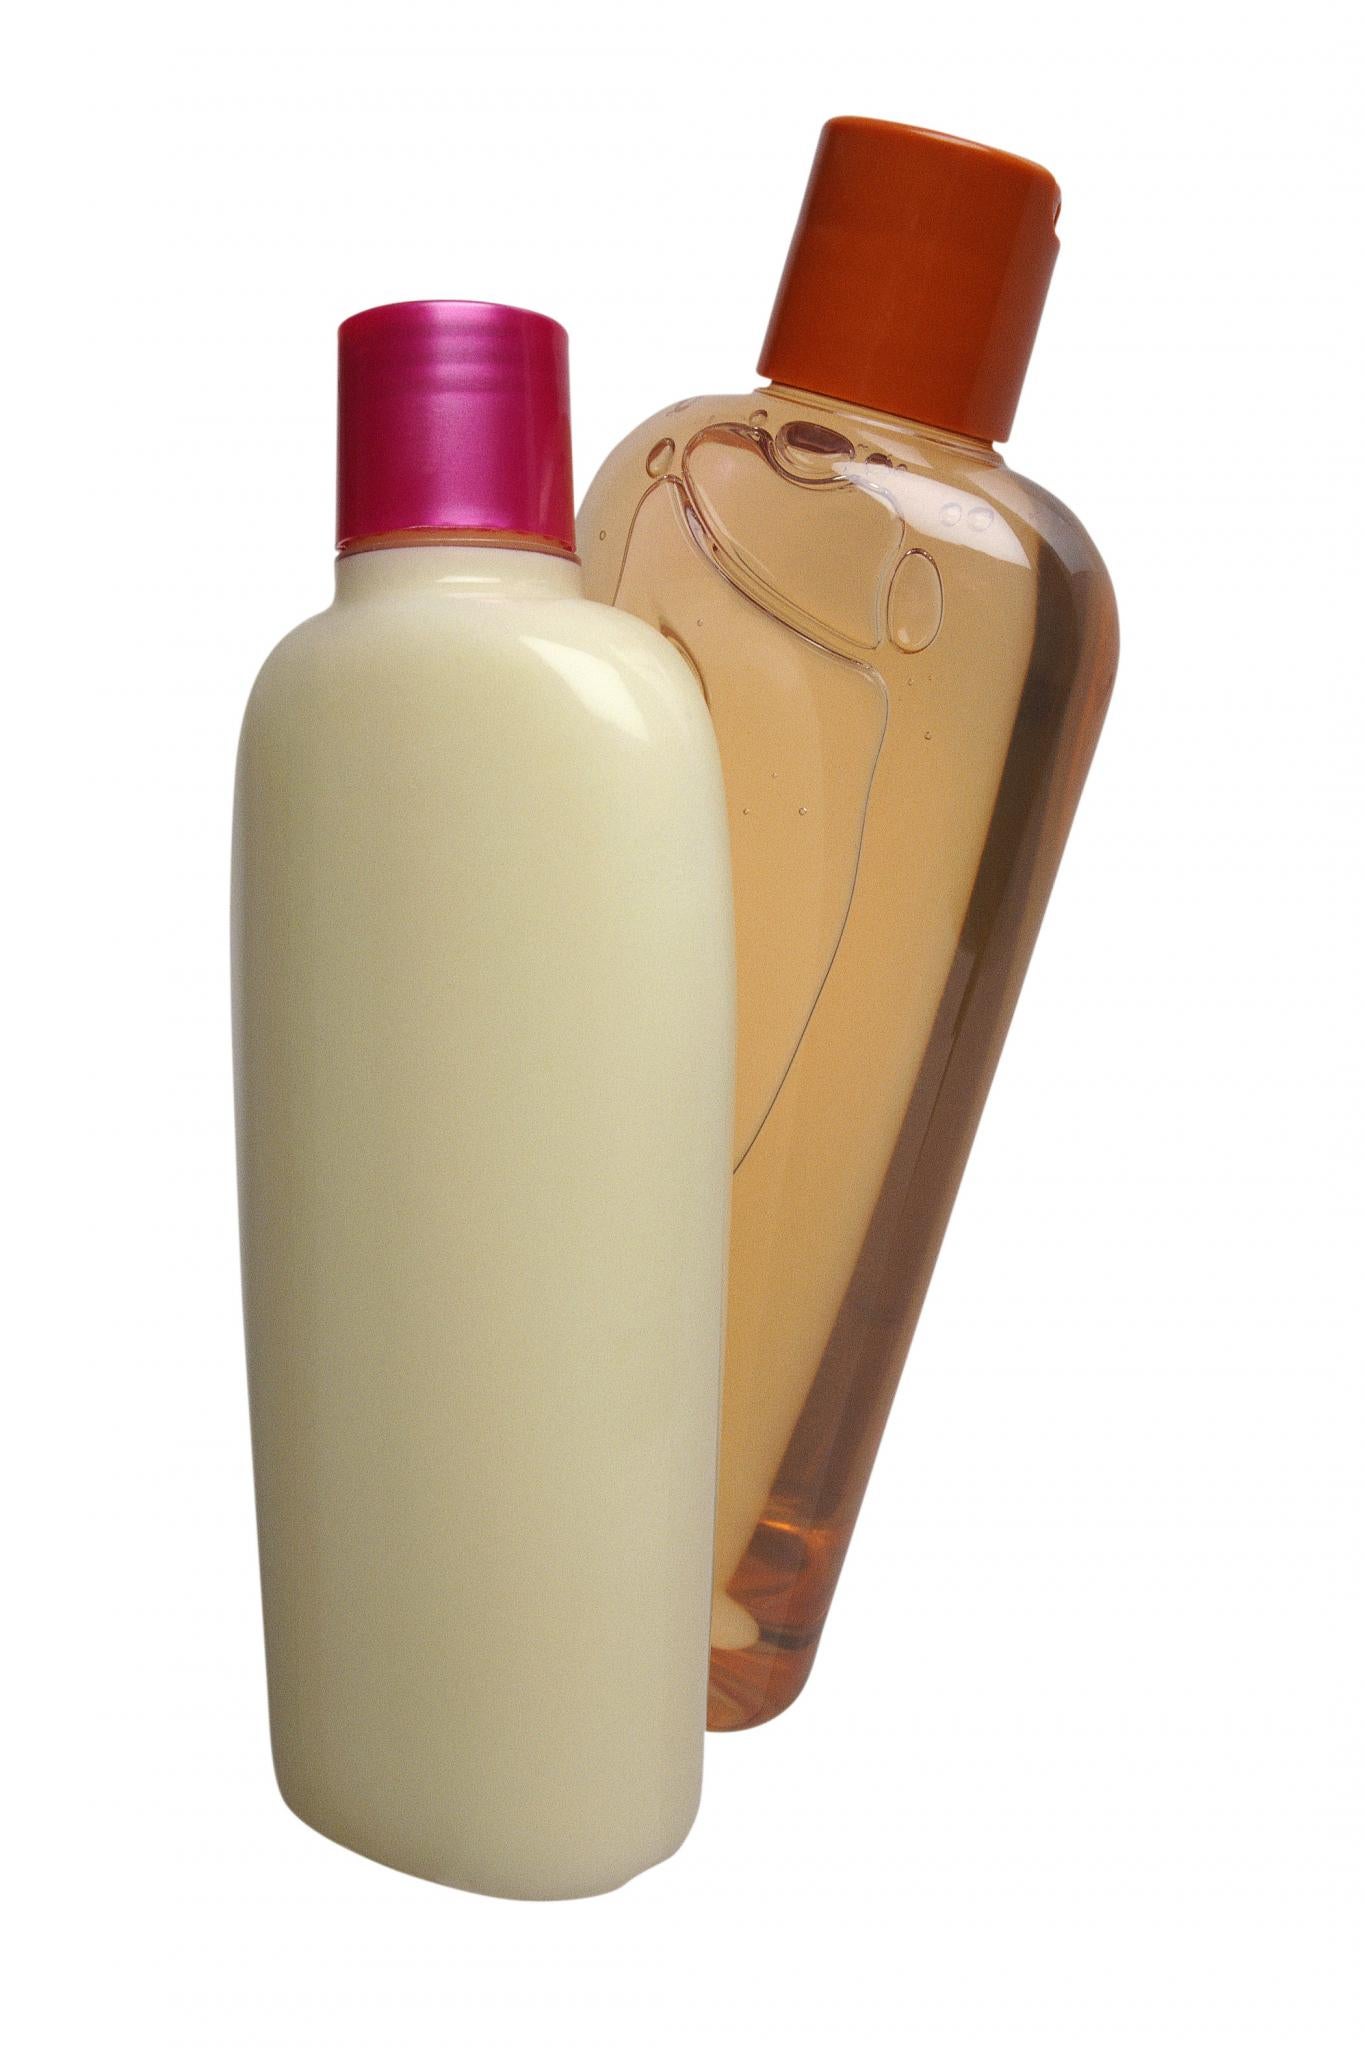 Hairlicious Inc.: Light Oils Are Best For Relaxed Hair